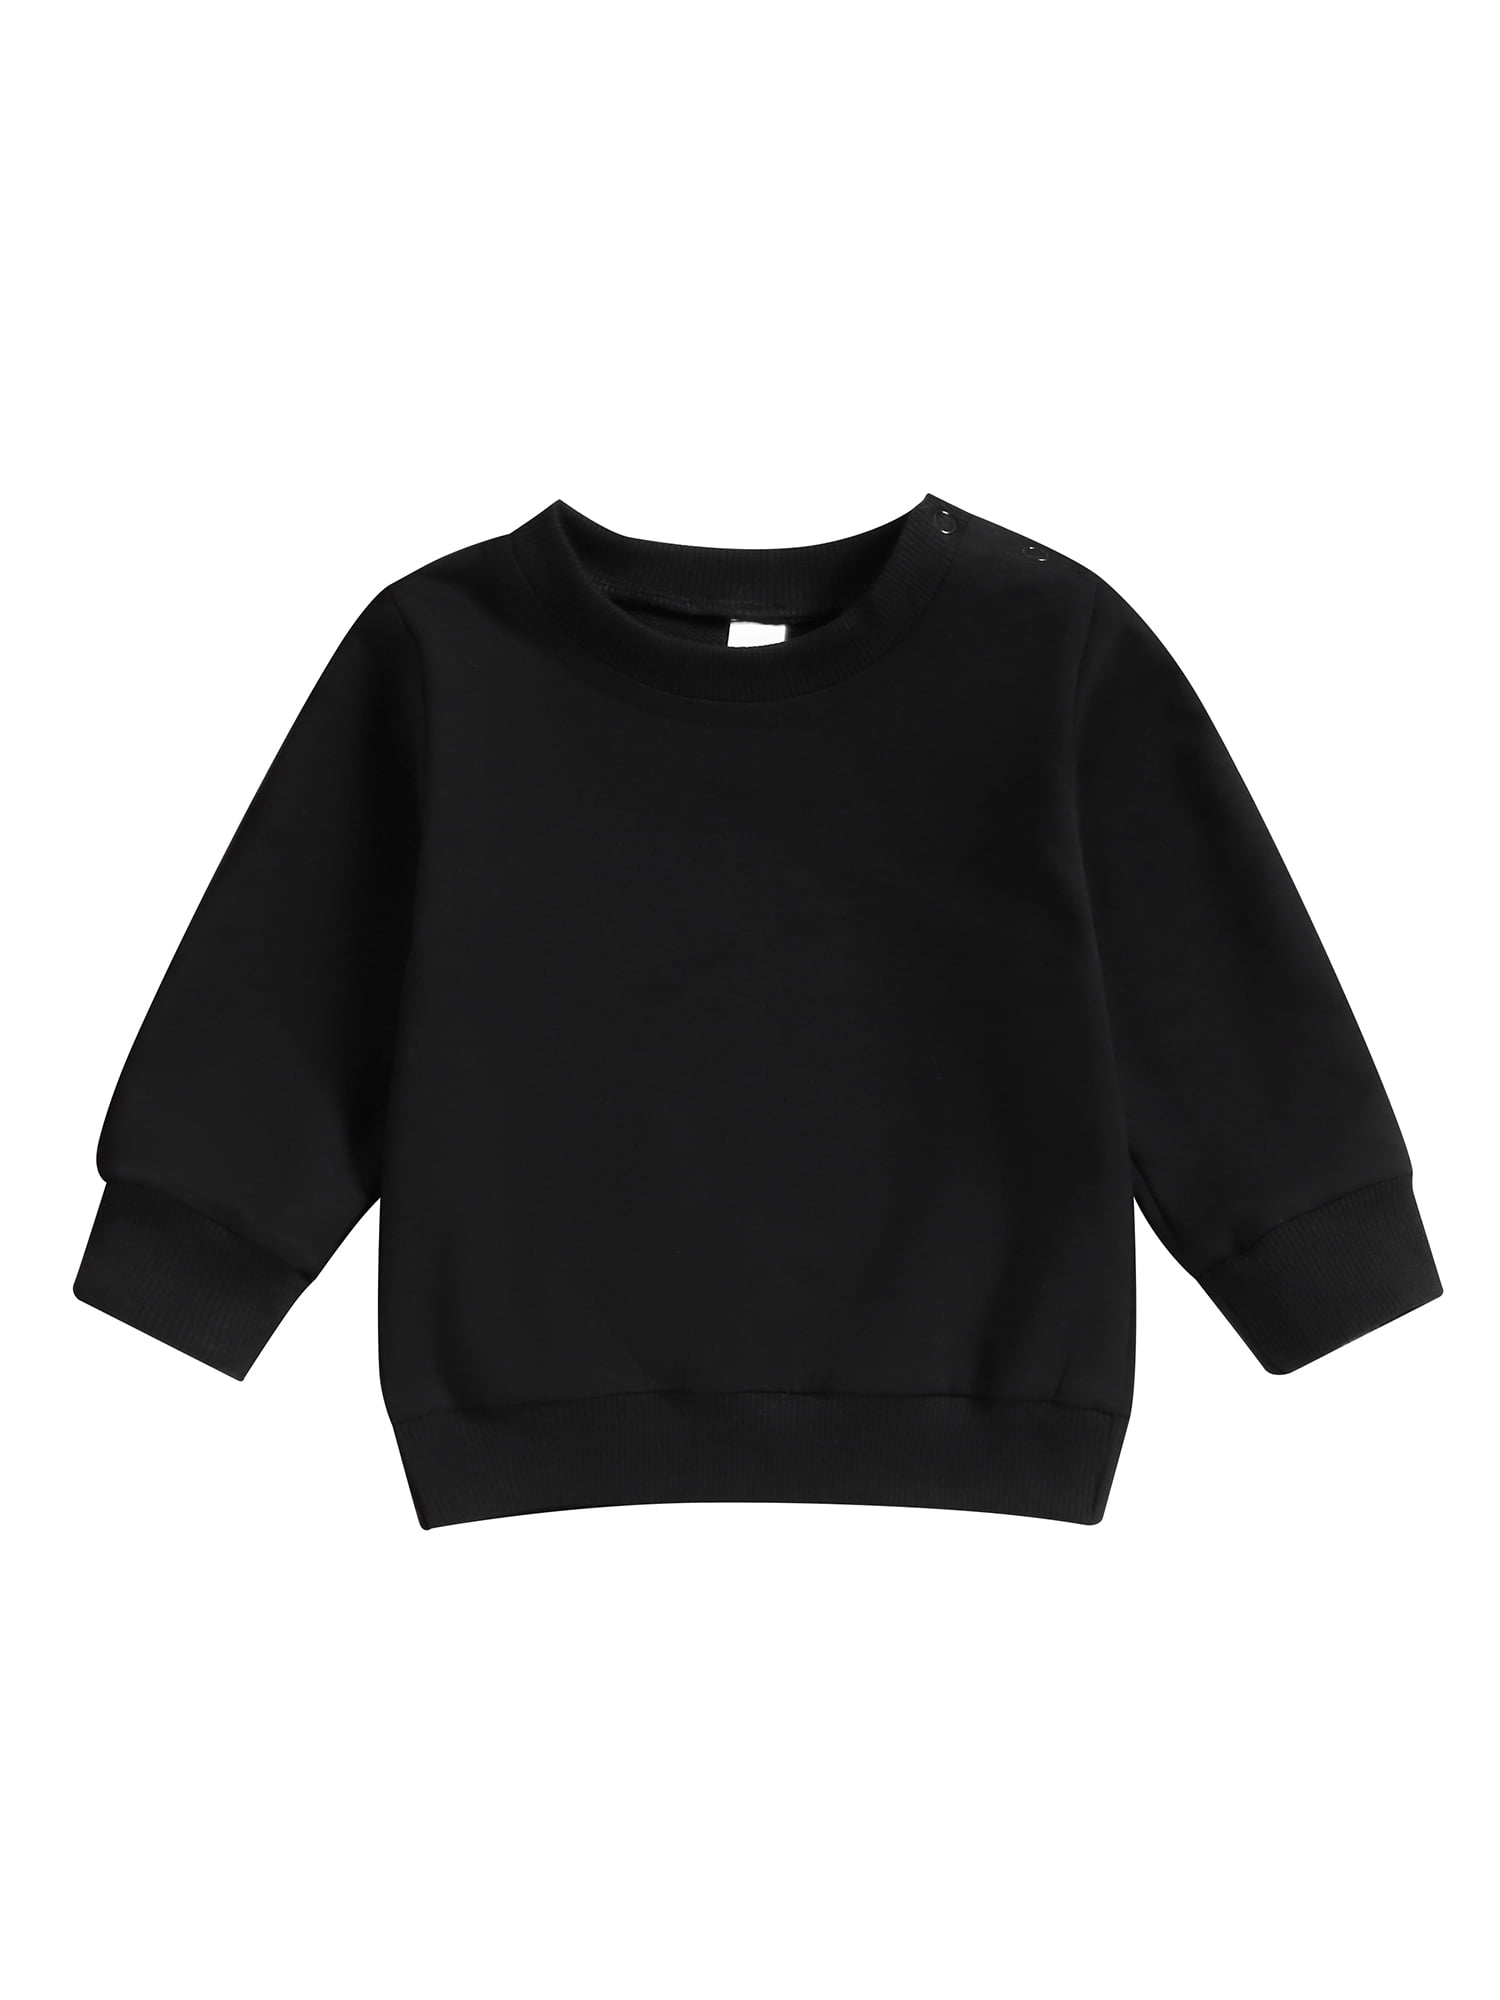 12-18 Infant Pullover Solid Toddler Months Boy Fall Crewneck Black Sweatshirt Long Clothes Baby Qtinghua Sleeve Color Tops